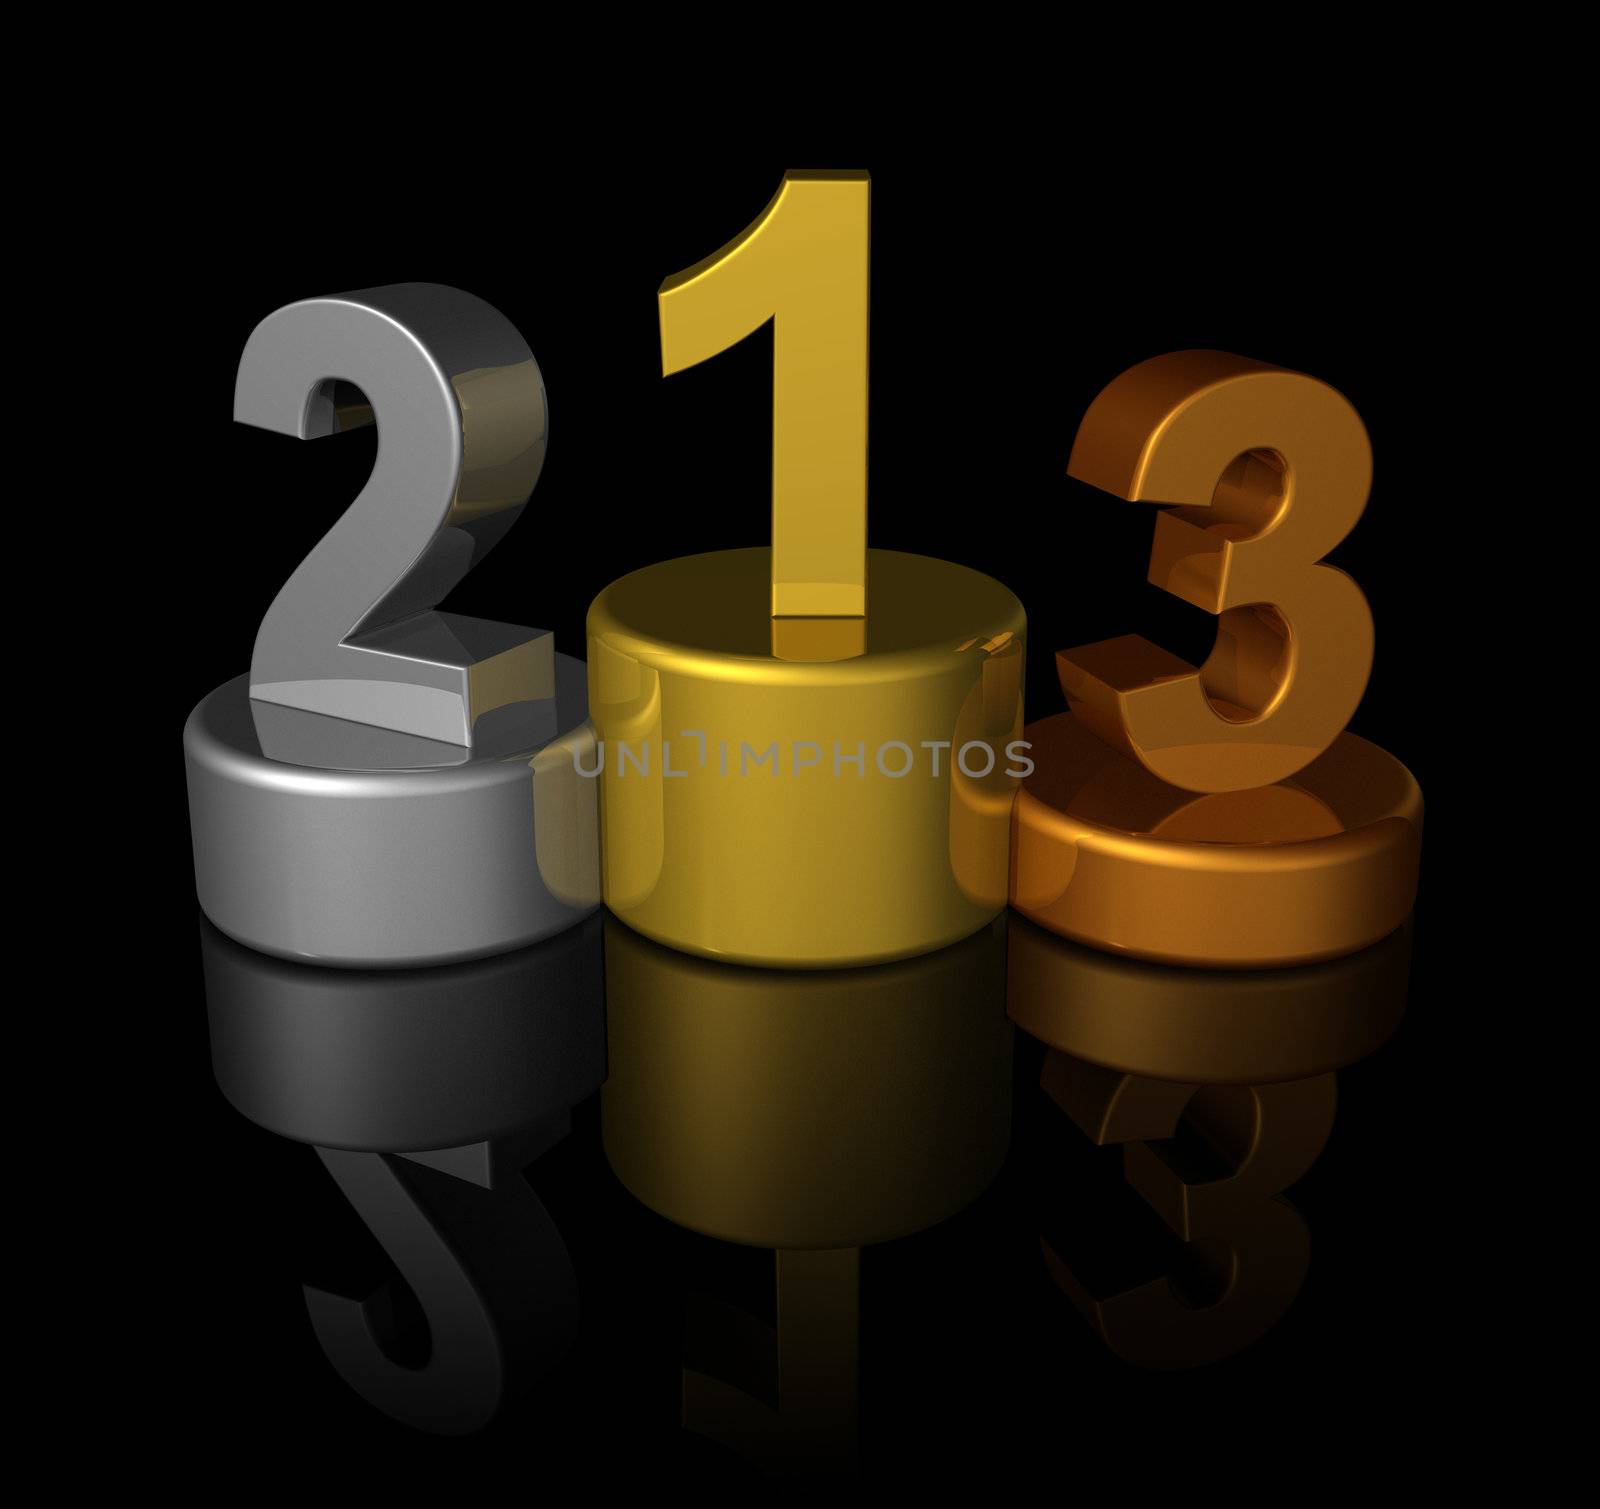 3D winners number podium by daboost